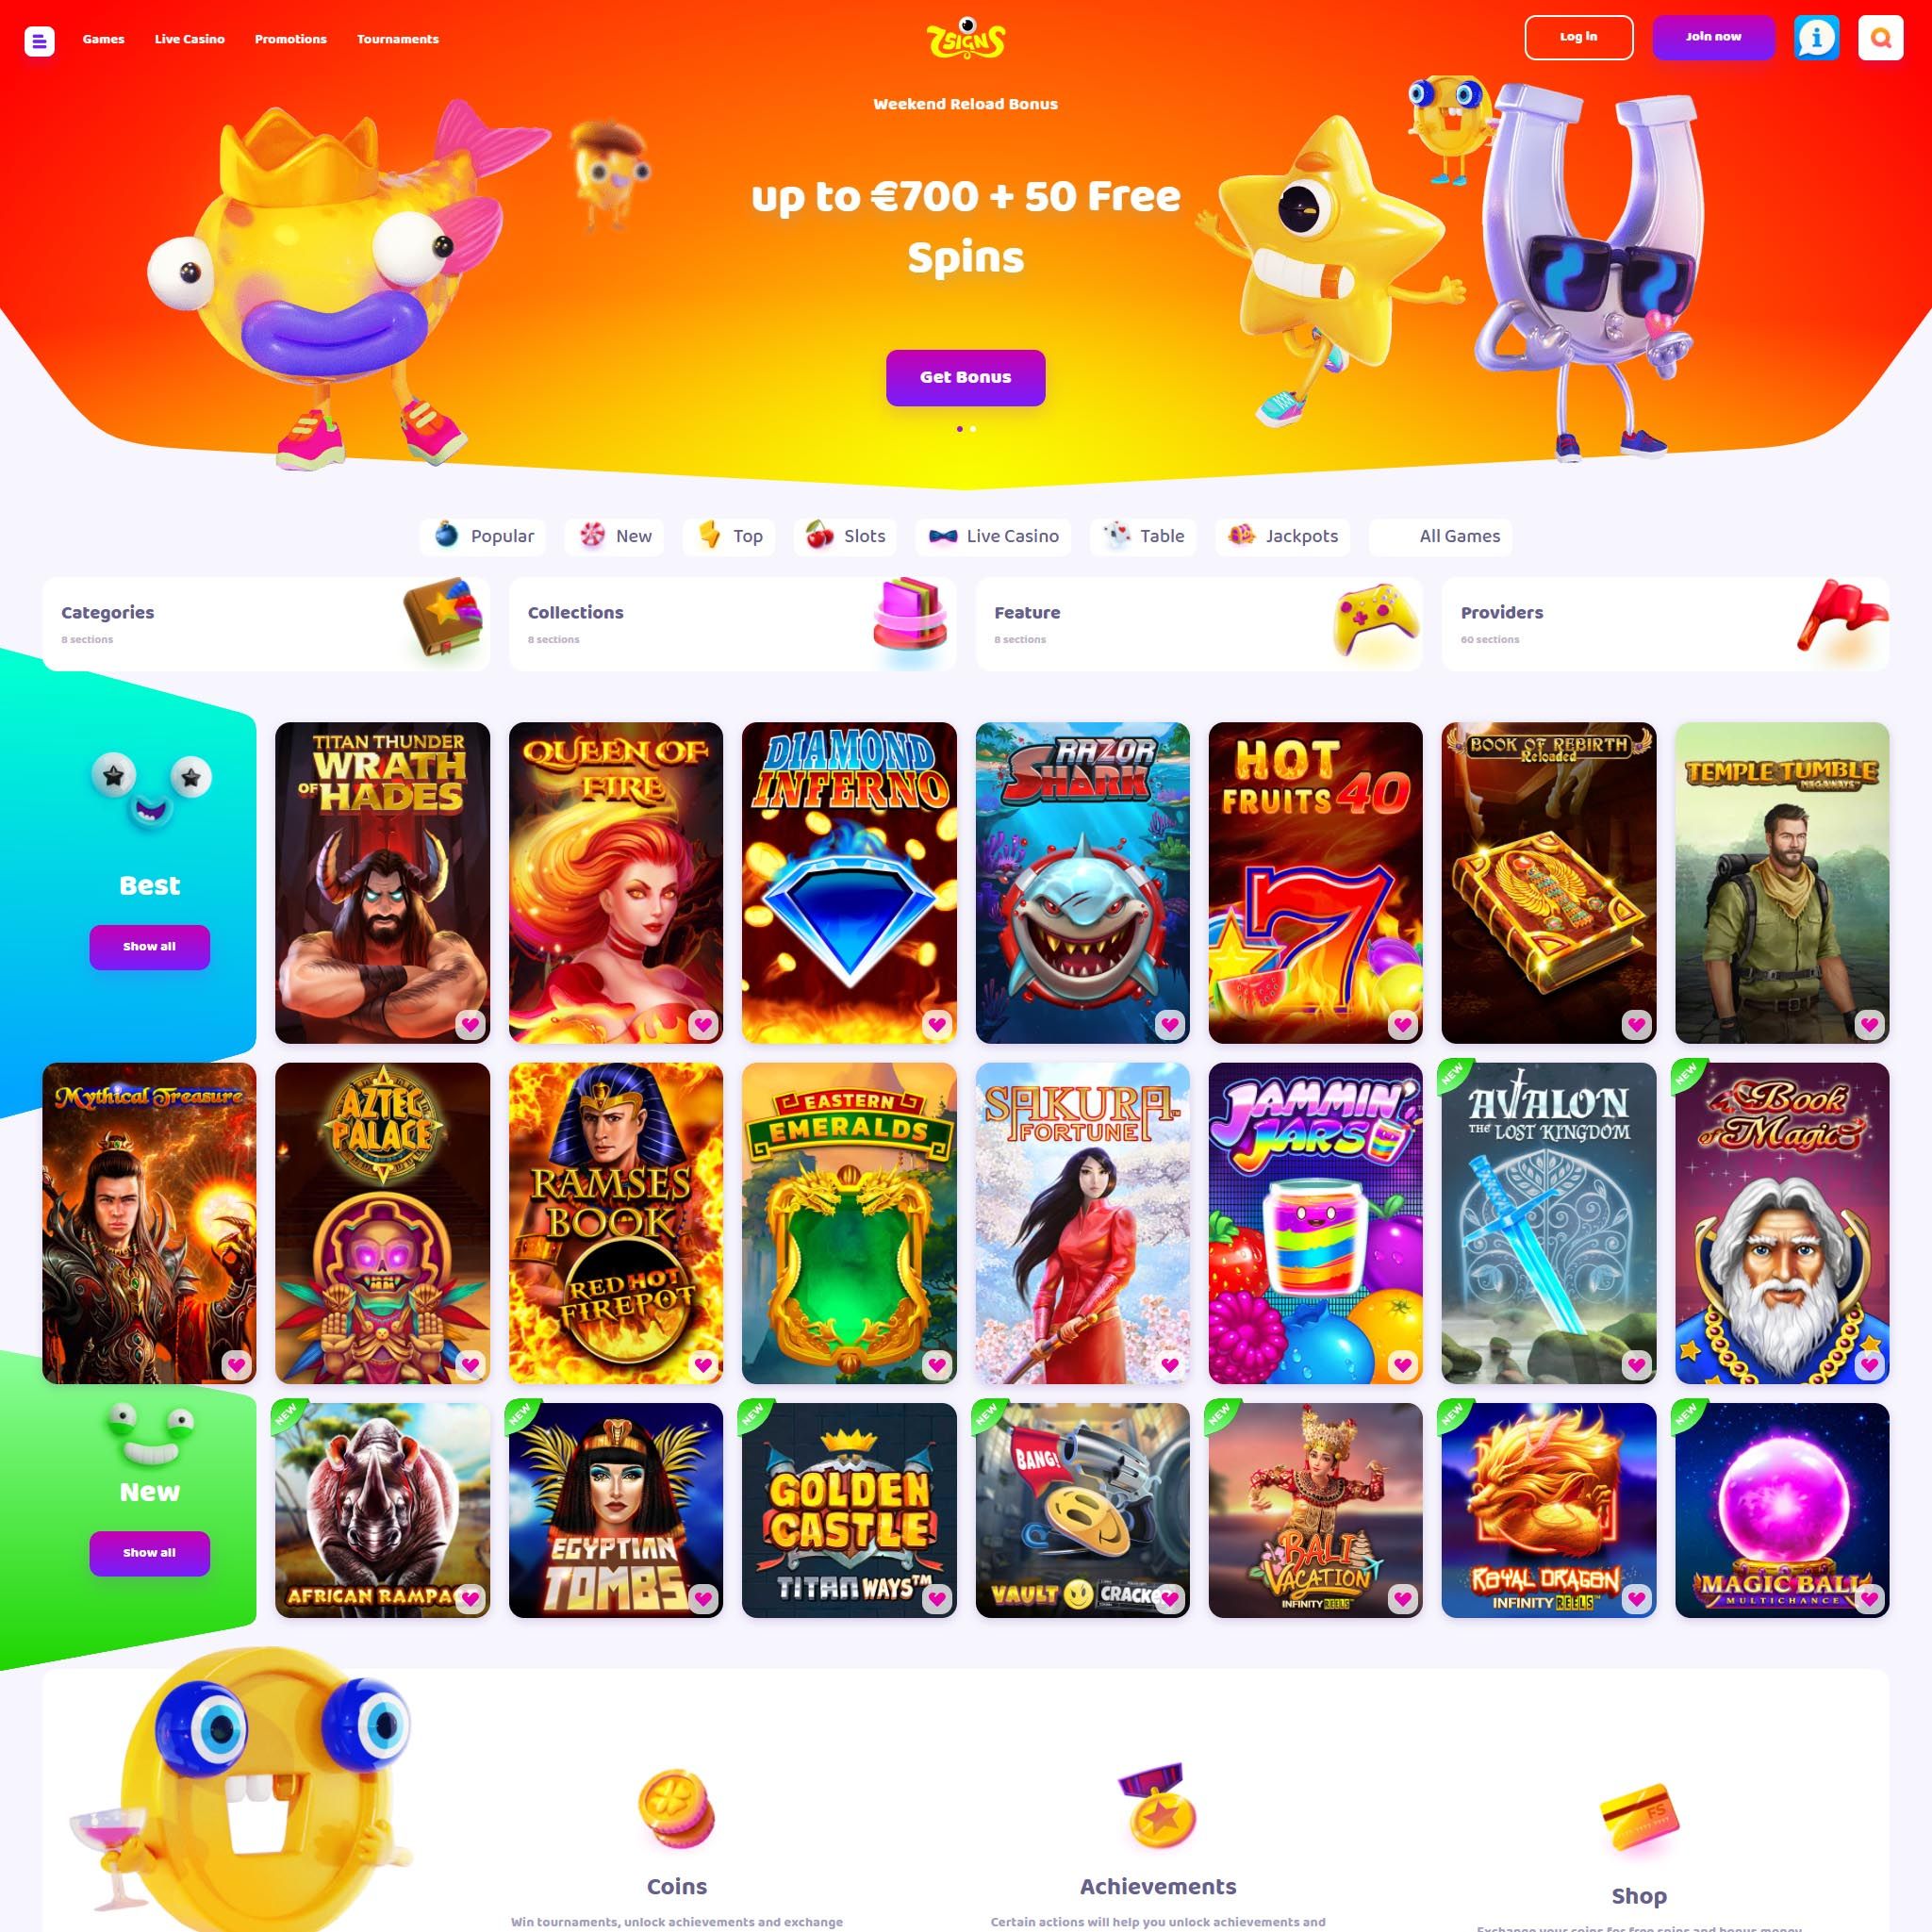 7Signs Casino review by Mr. Gamble